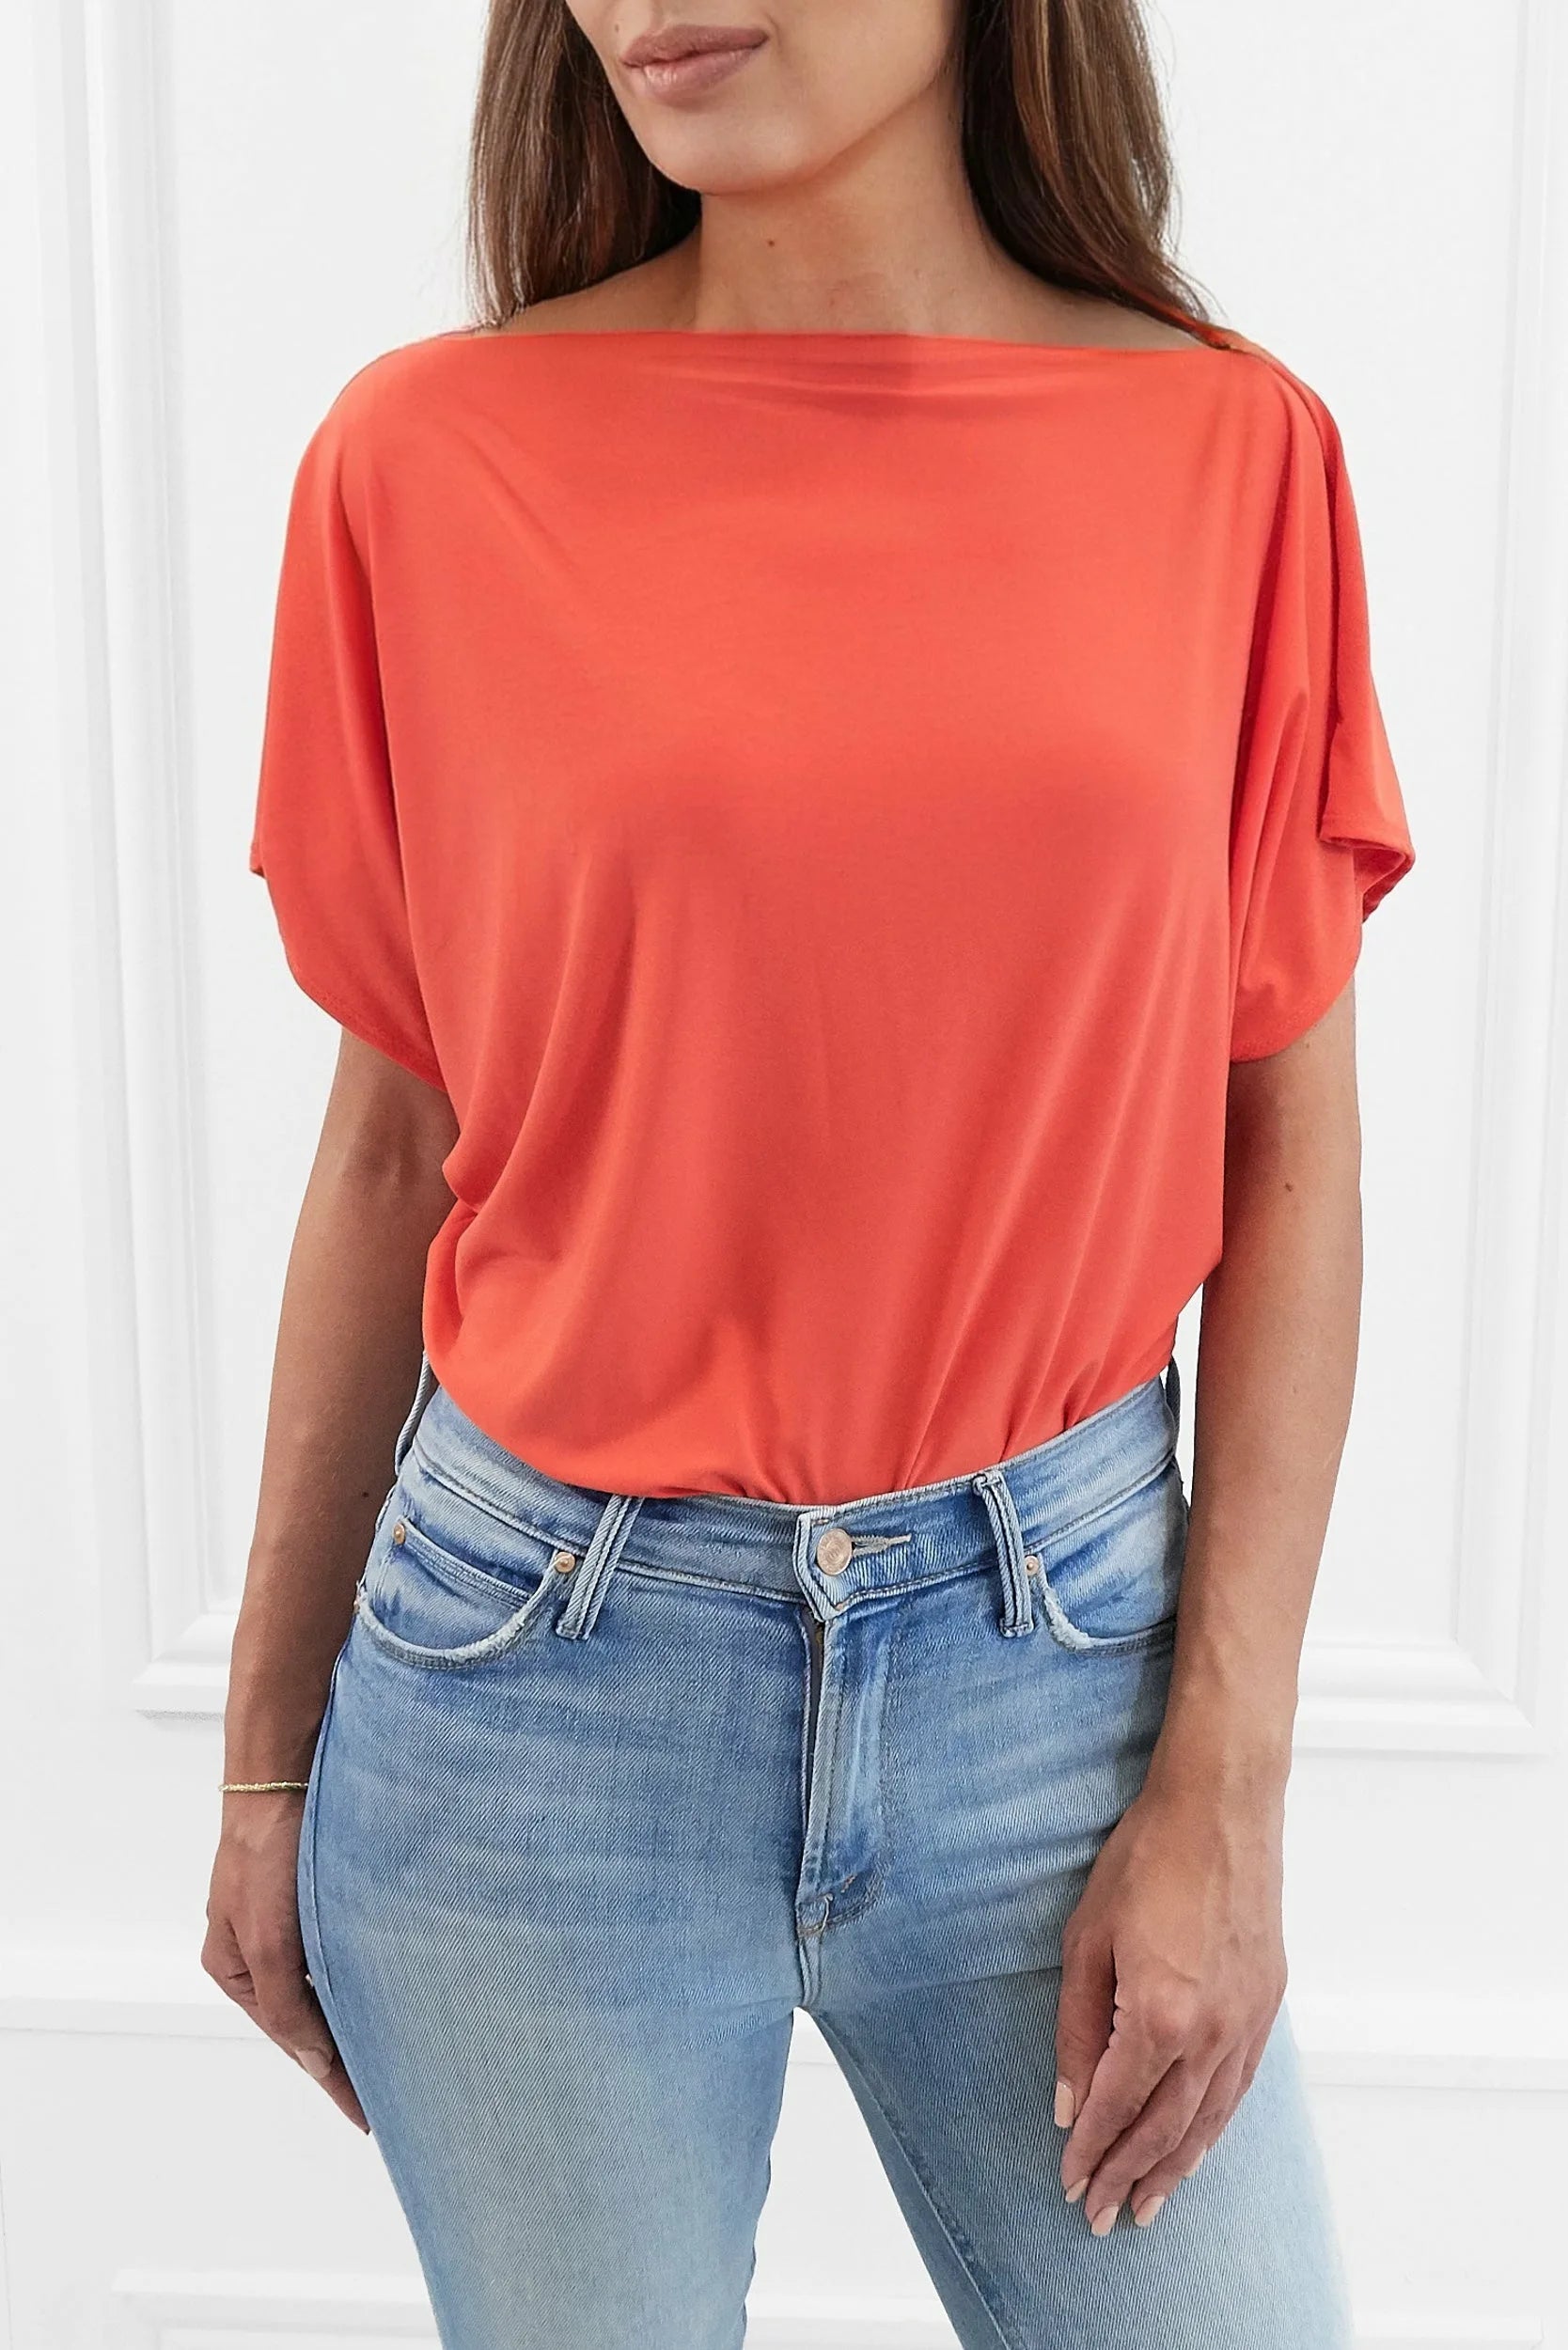 Honor Gold Finley Orange Batwing Top With Slashed Neckline